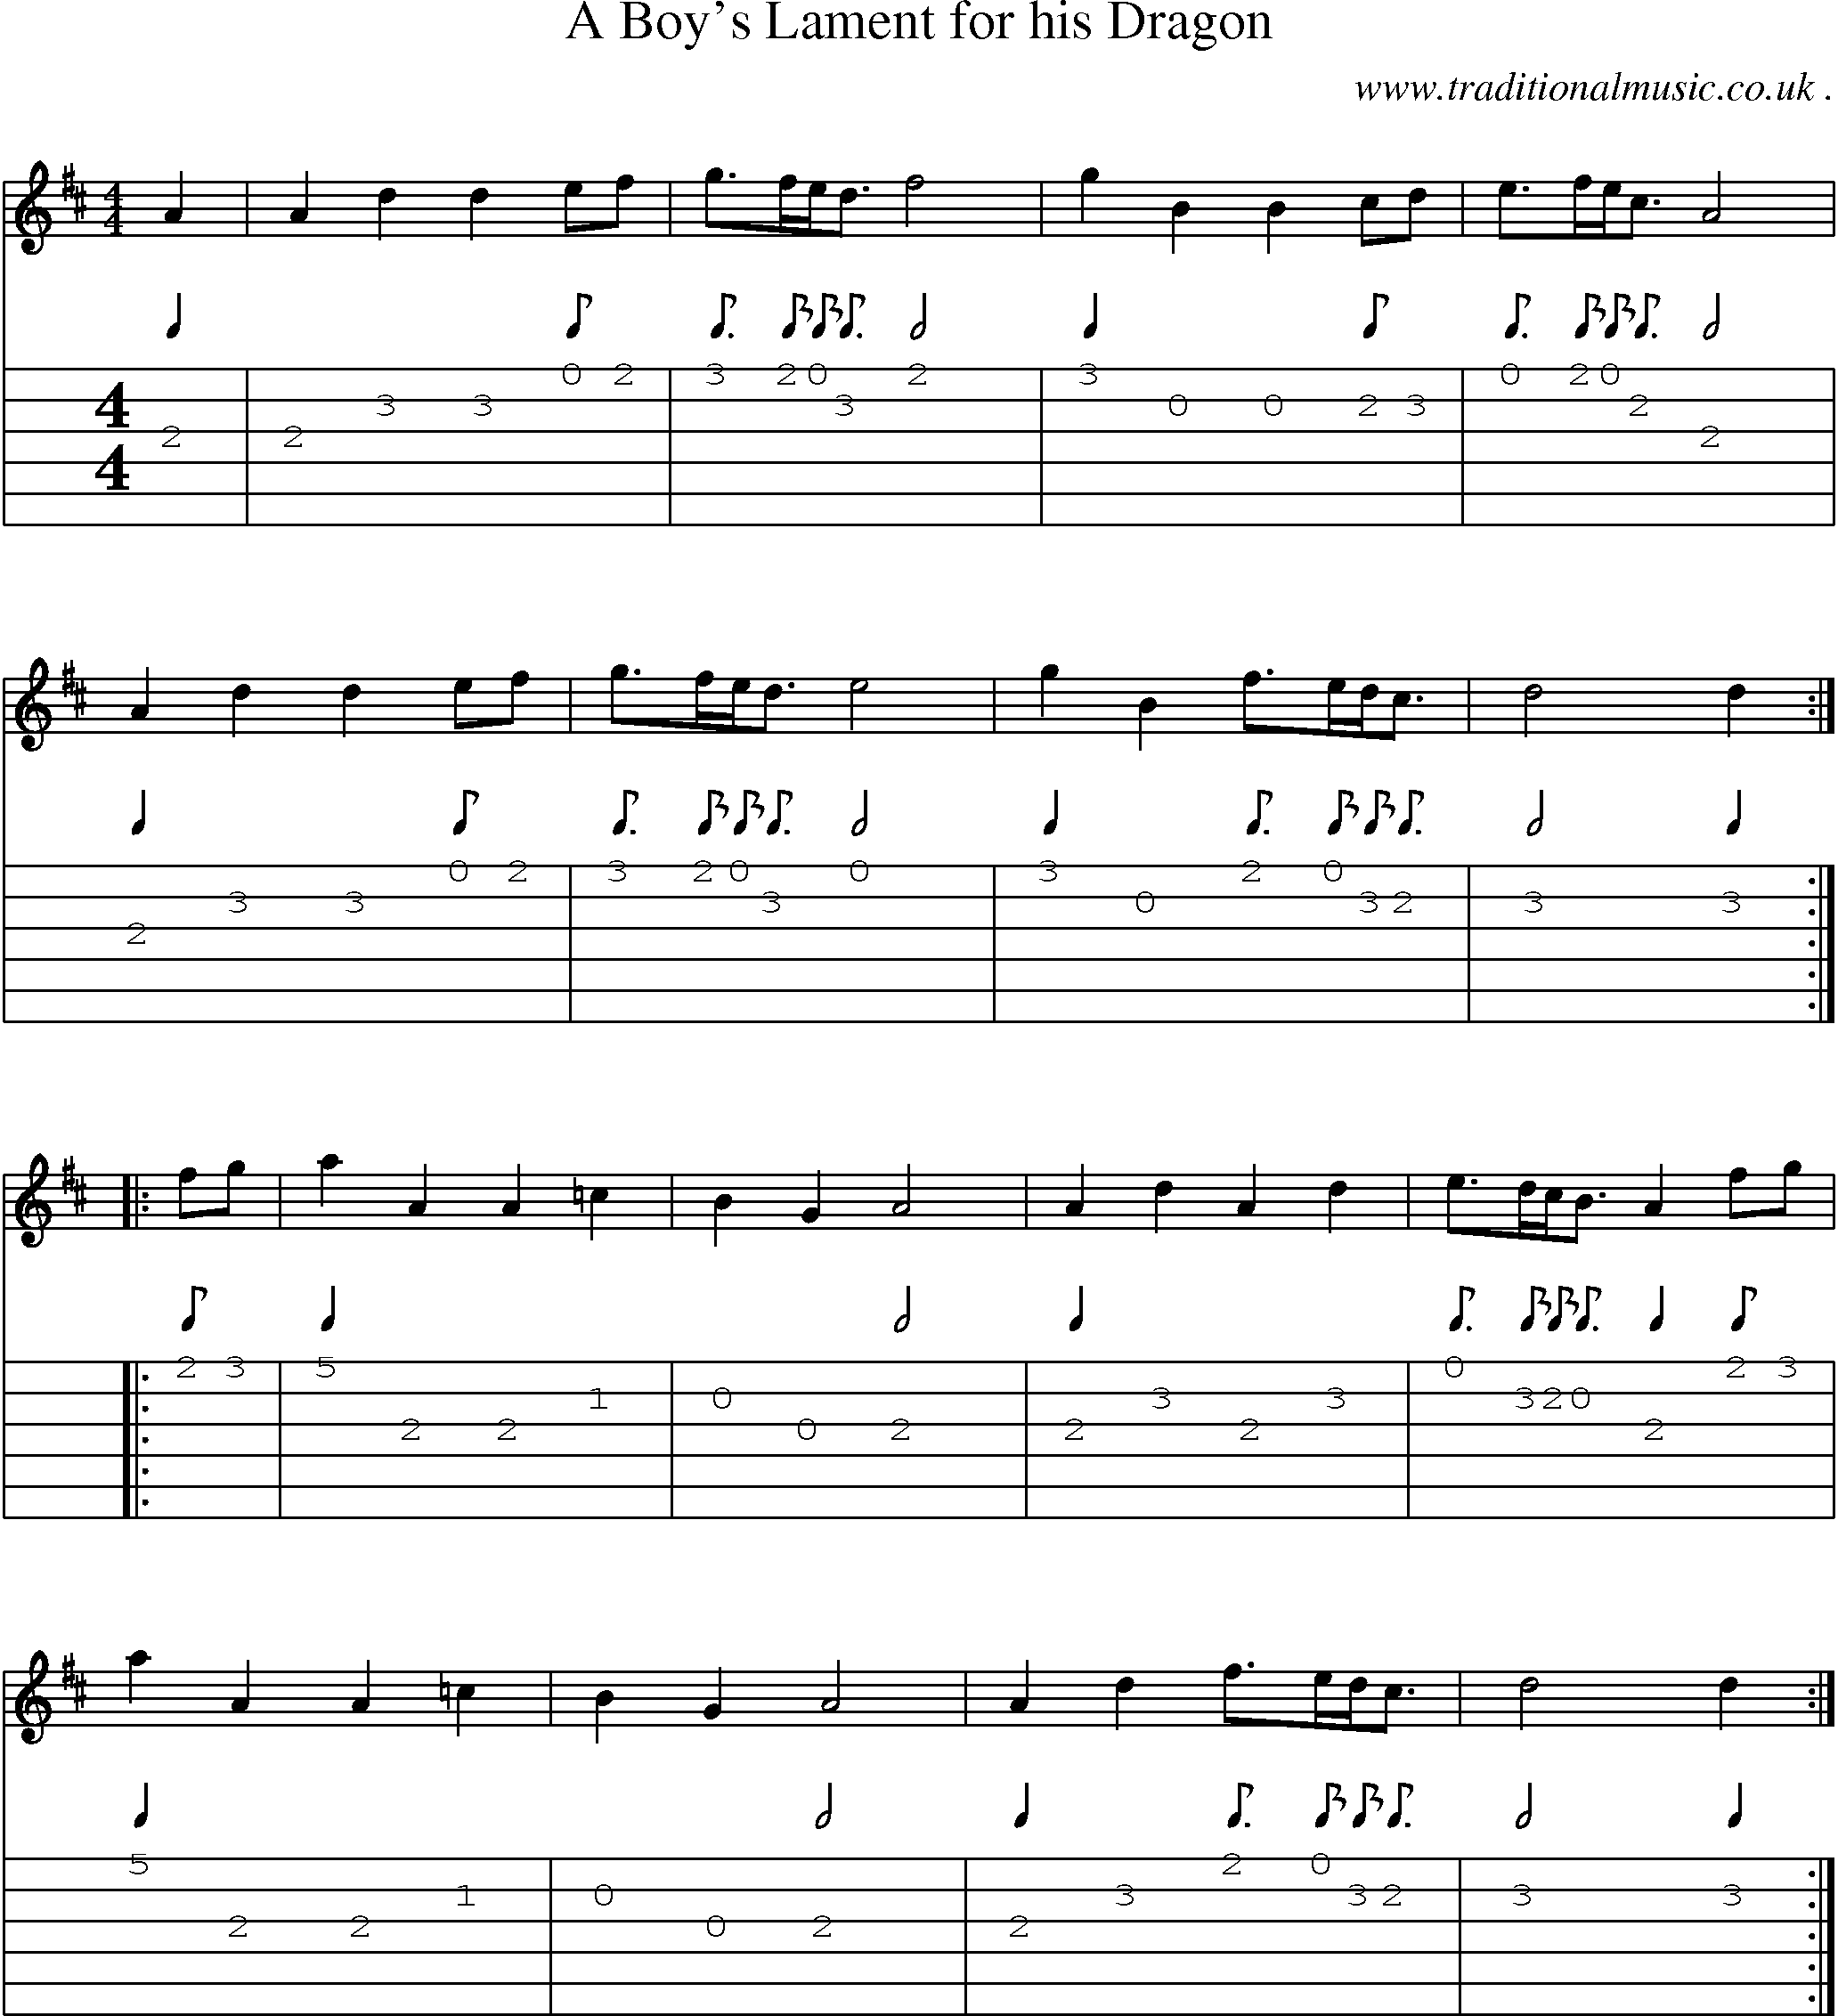 Music Score and Guitar Tabs for A Boys Lament For His Dragon